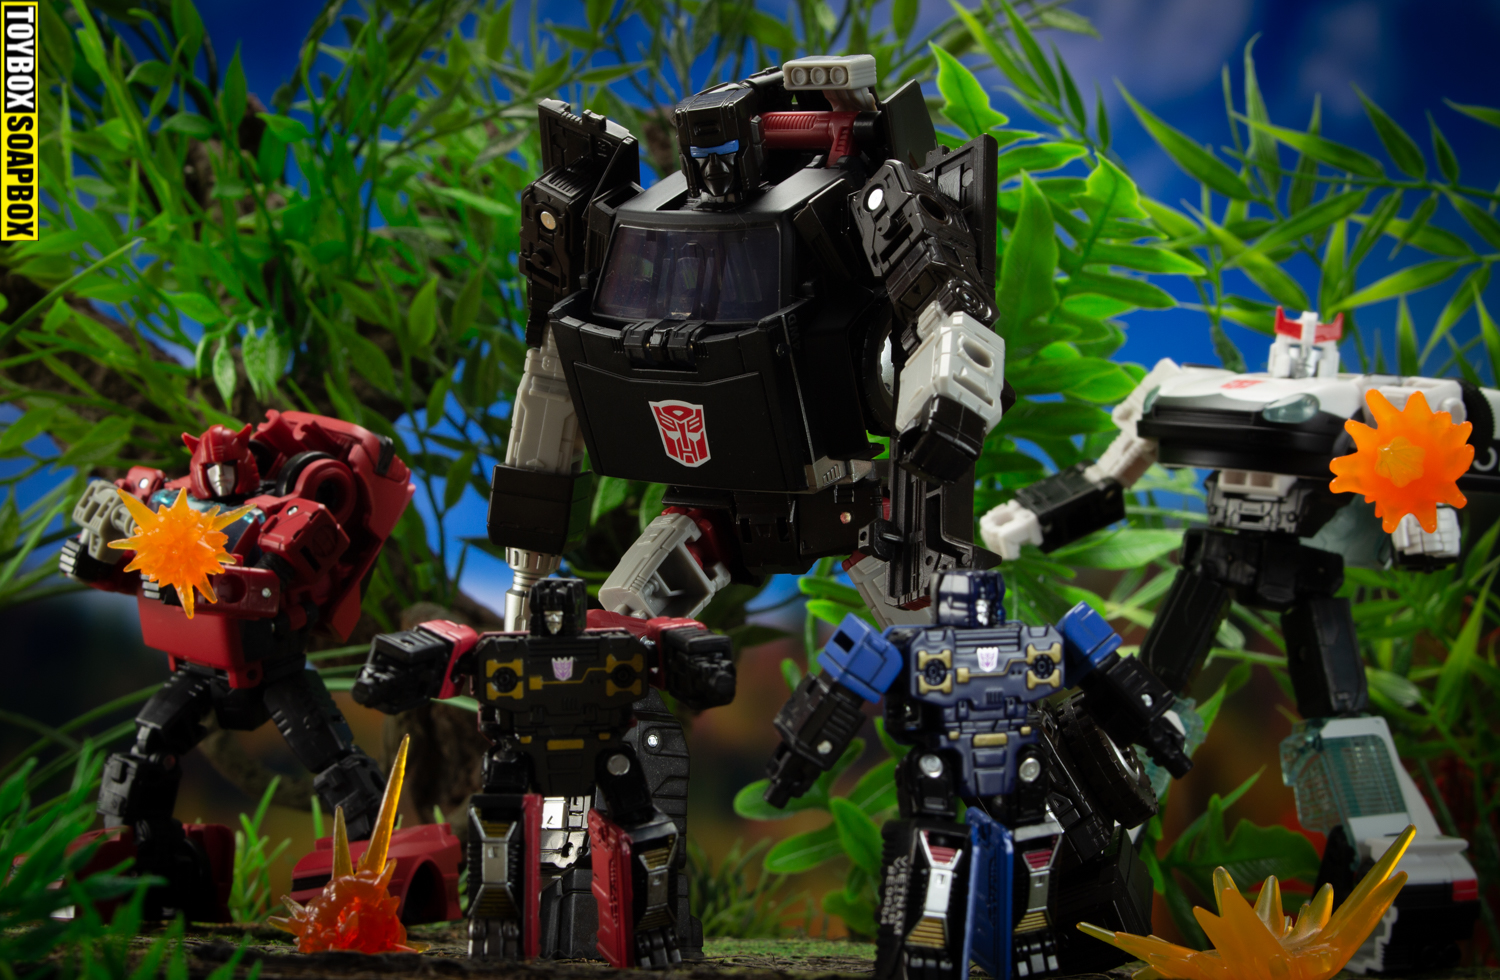 Earthrise trailbreaker, Prowl, cliffjumper, rumble and frenzy